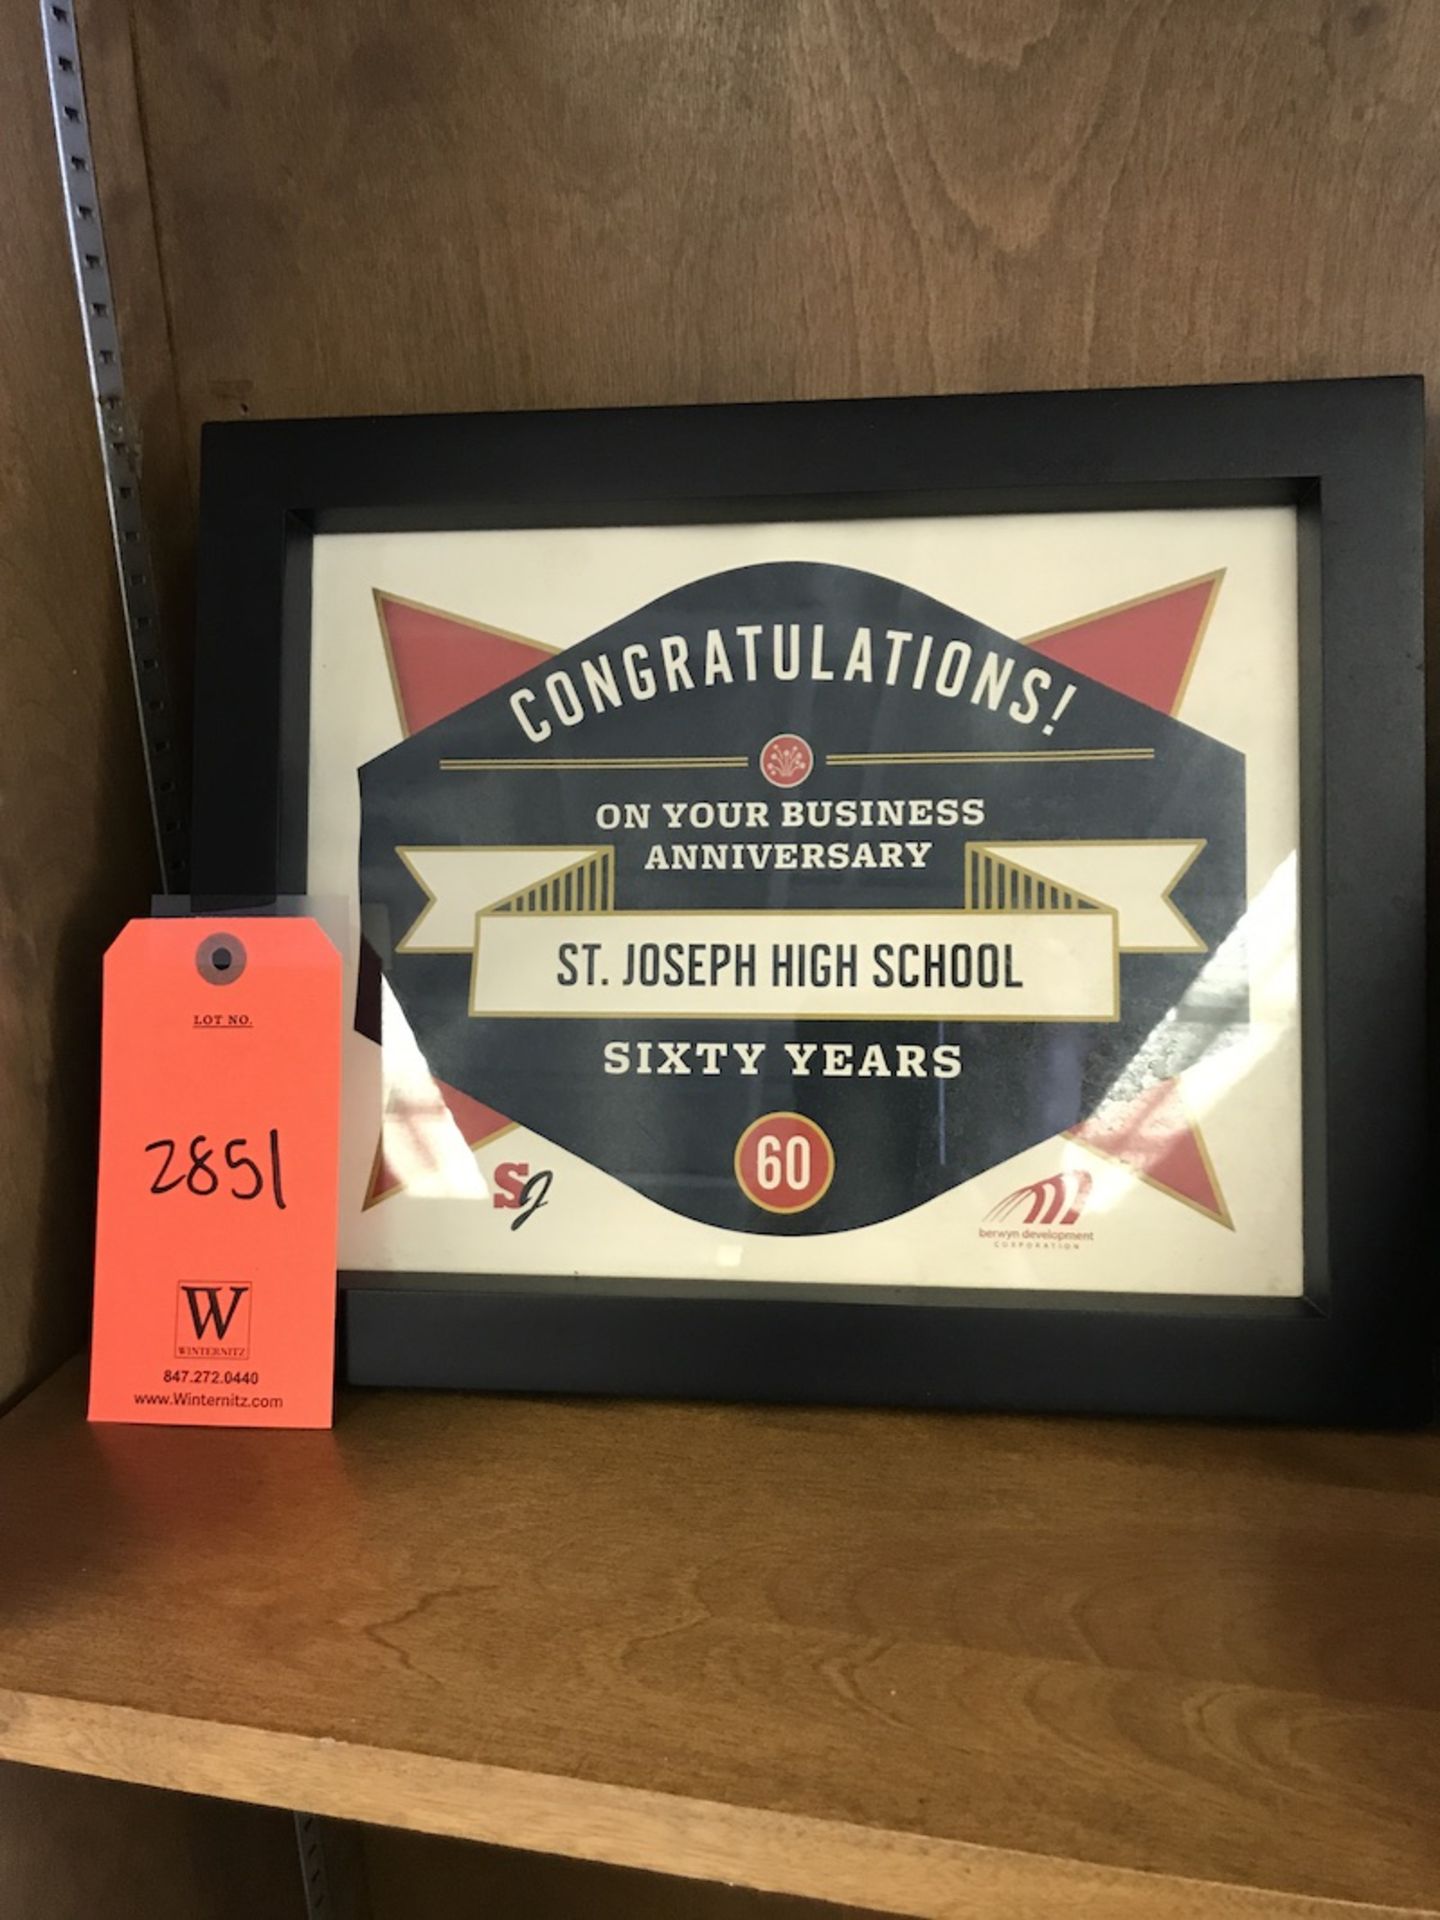 St. Joseph High School 60 Years On Your Business Framed Certificate (Room 307)